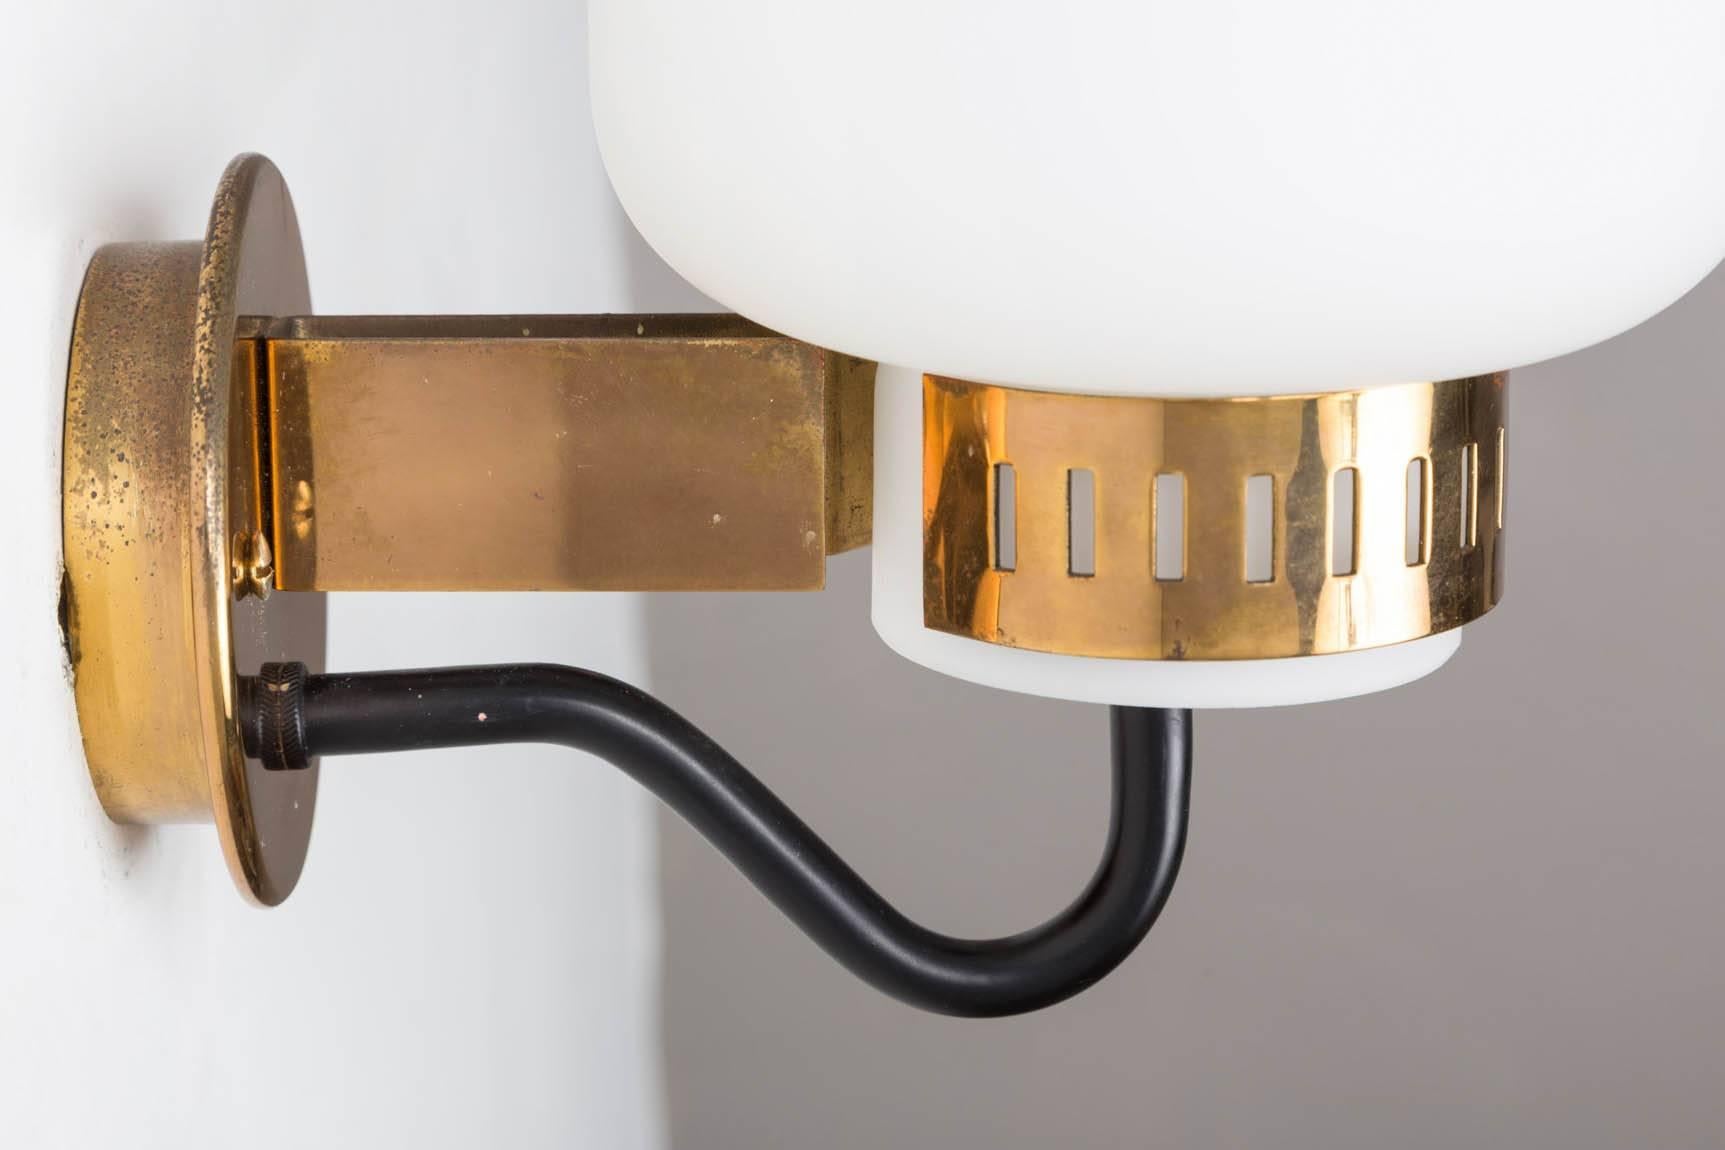 Pair of Stilnovo '2030' brass and glass sconces, circa 1965. Executed in brass, black painted metal and thick opaline glass, with original Stilnovo manufacturer's label on one lamp. A sculptural and refined design characteristic of 1960s Italian